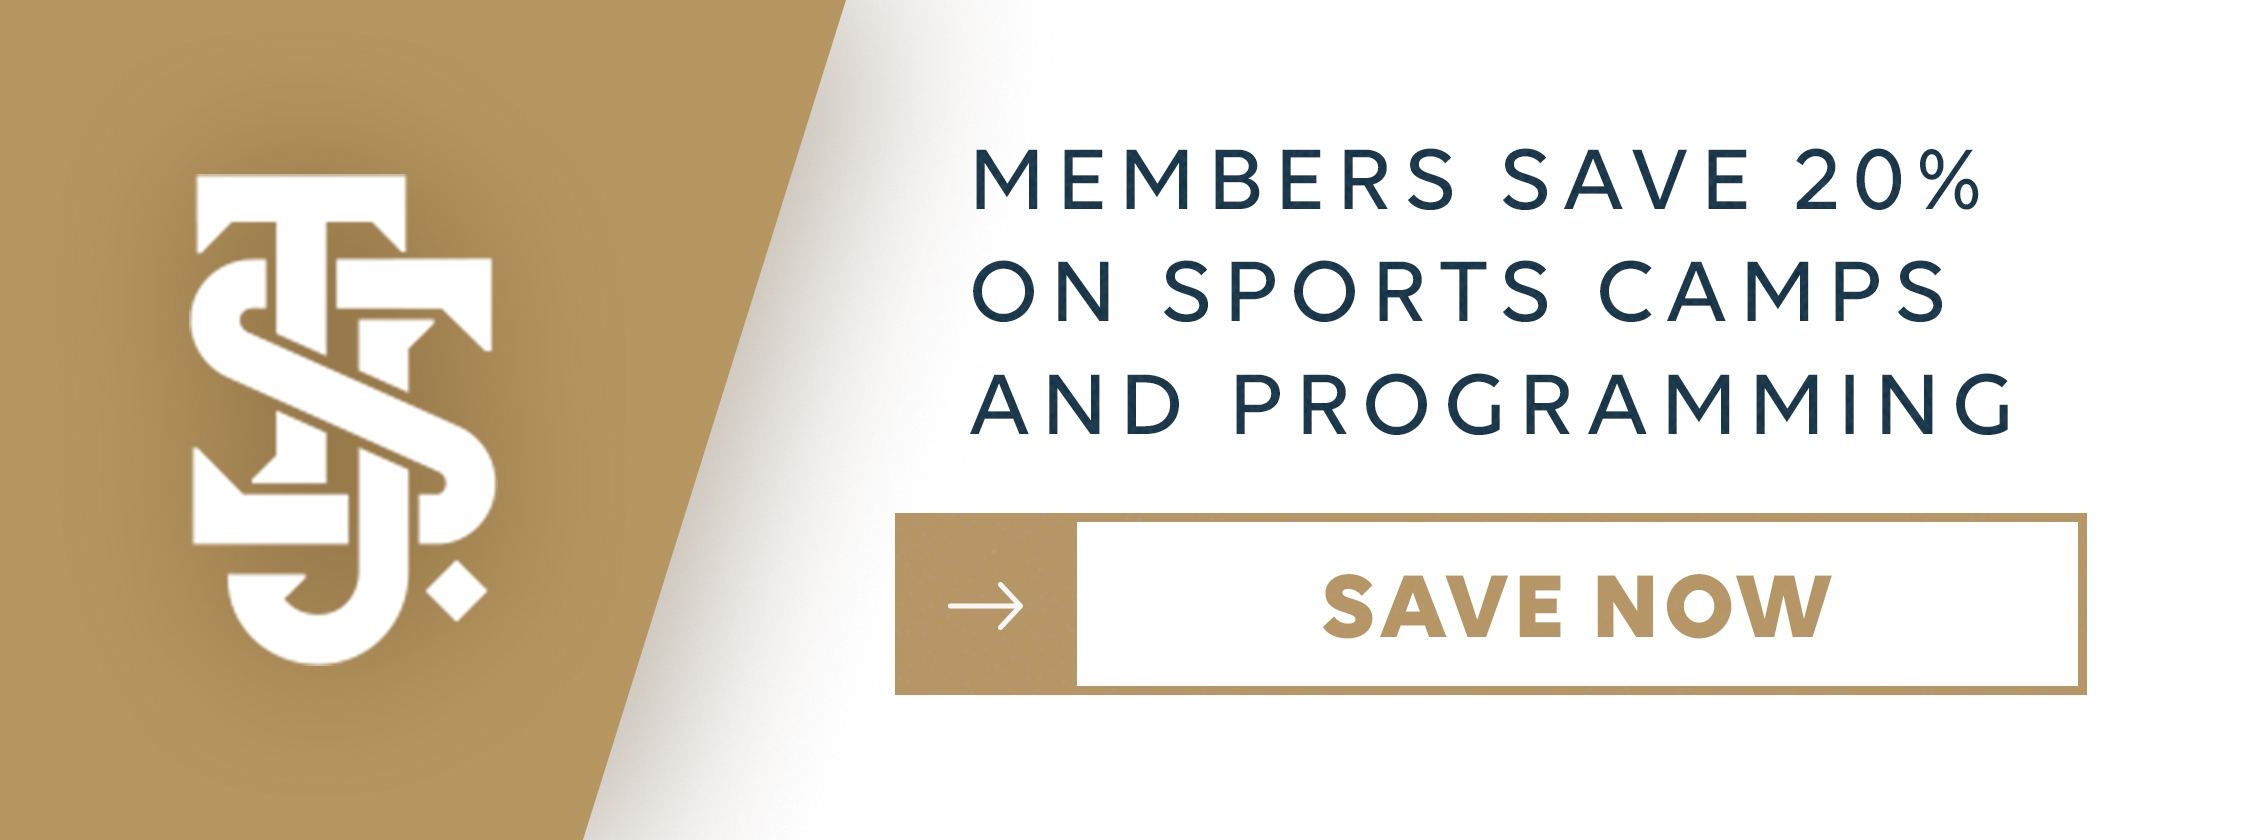 Members Save 20% on Sports Camps and Programming